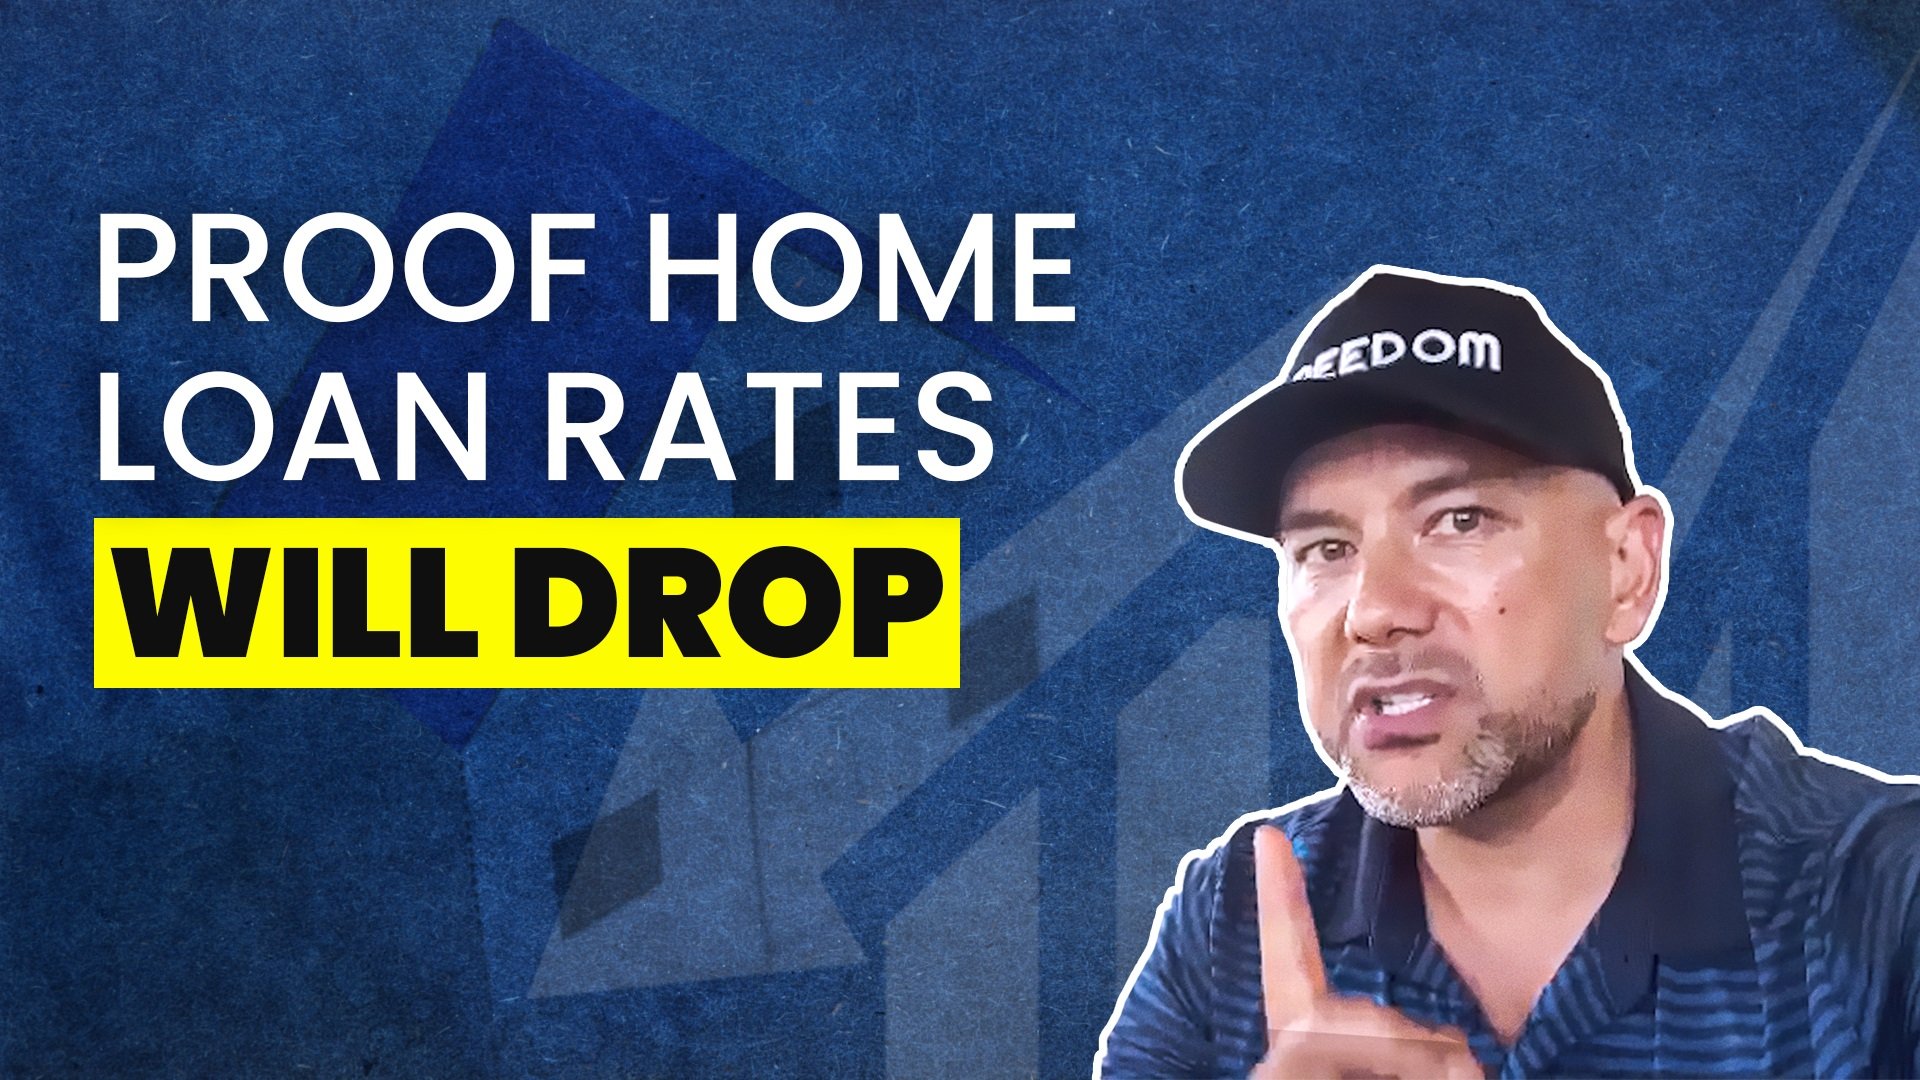 Sarrie_Proof Home Loan Rates Will Drop_Thumbnail